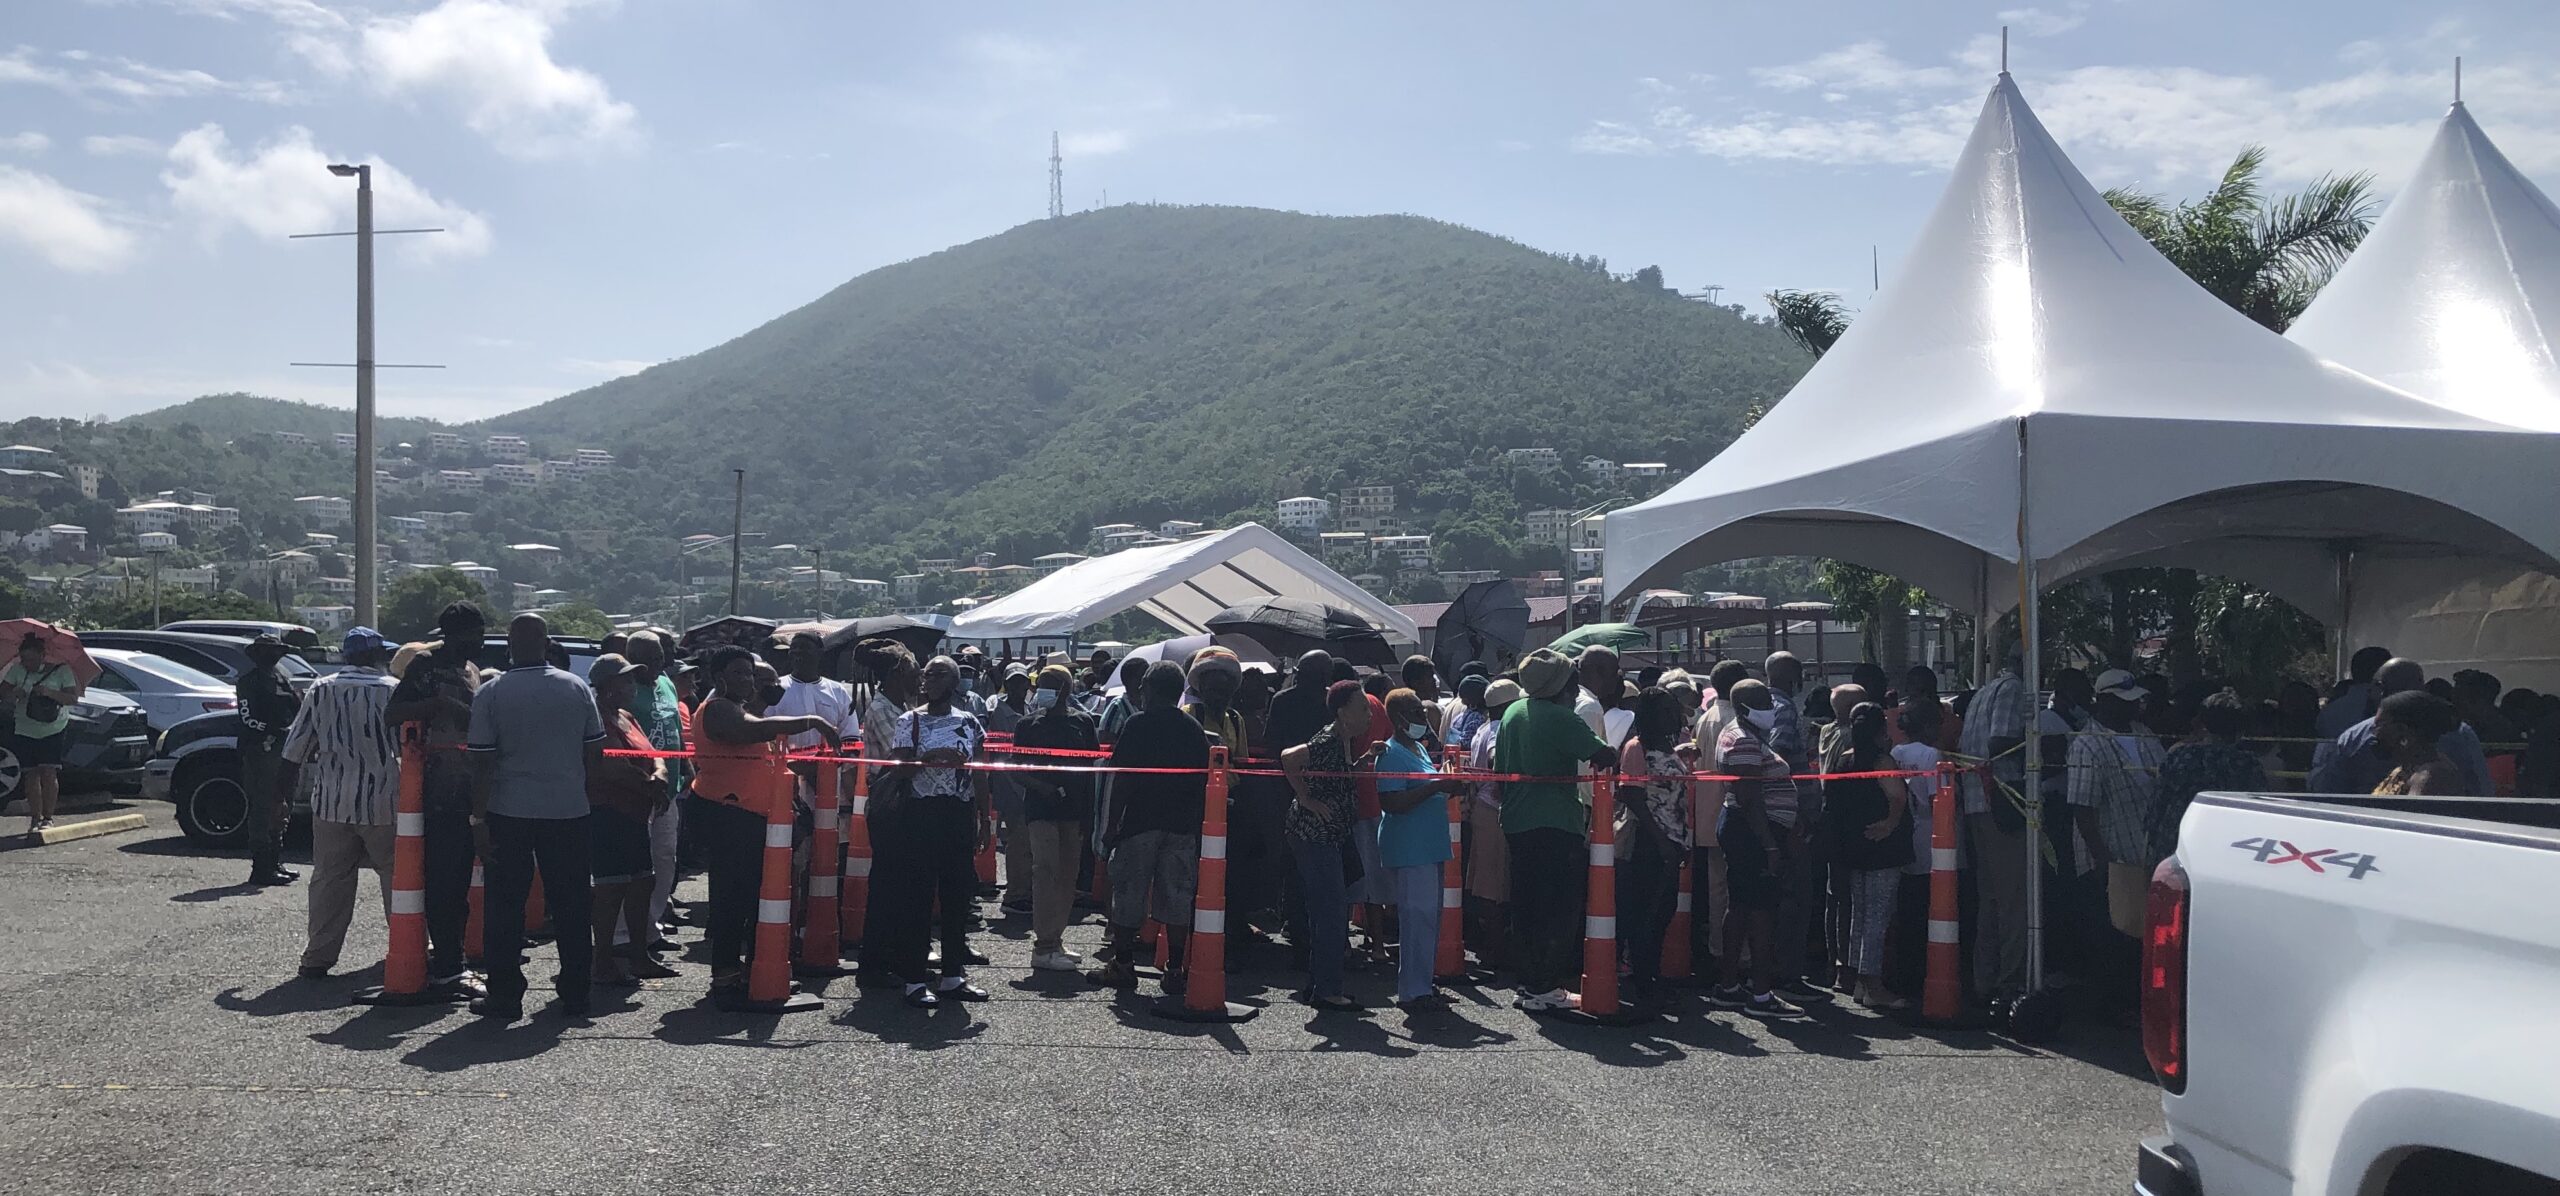 Closer to the tents where checks were being distributed, recipients were corralled into queues much like at the TSA line at airports. (Source photo by Sian Cobb)